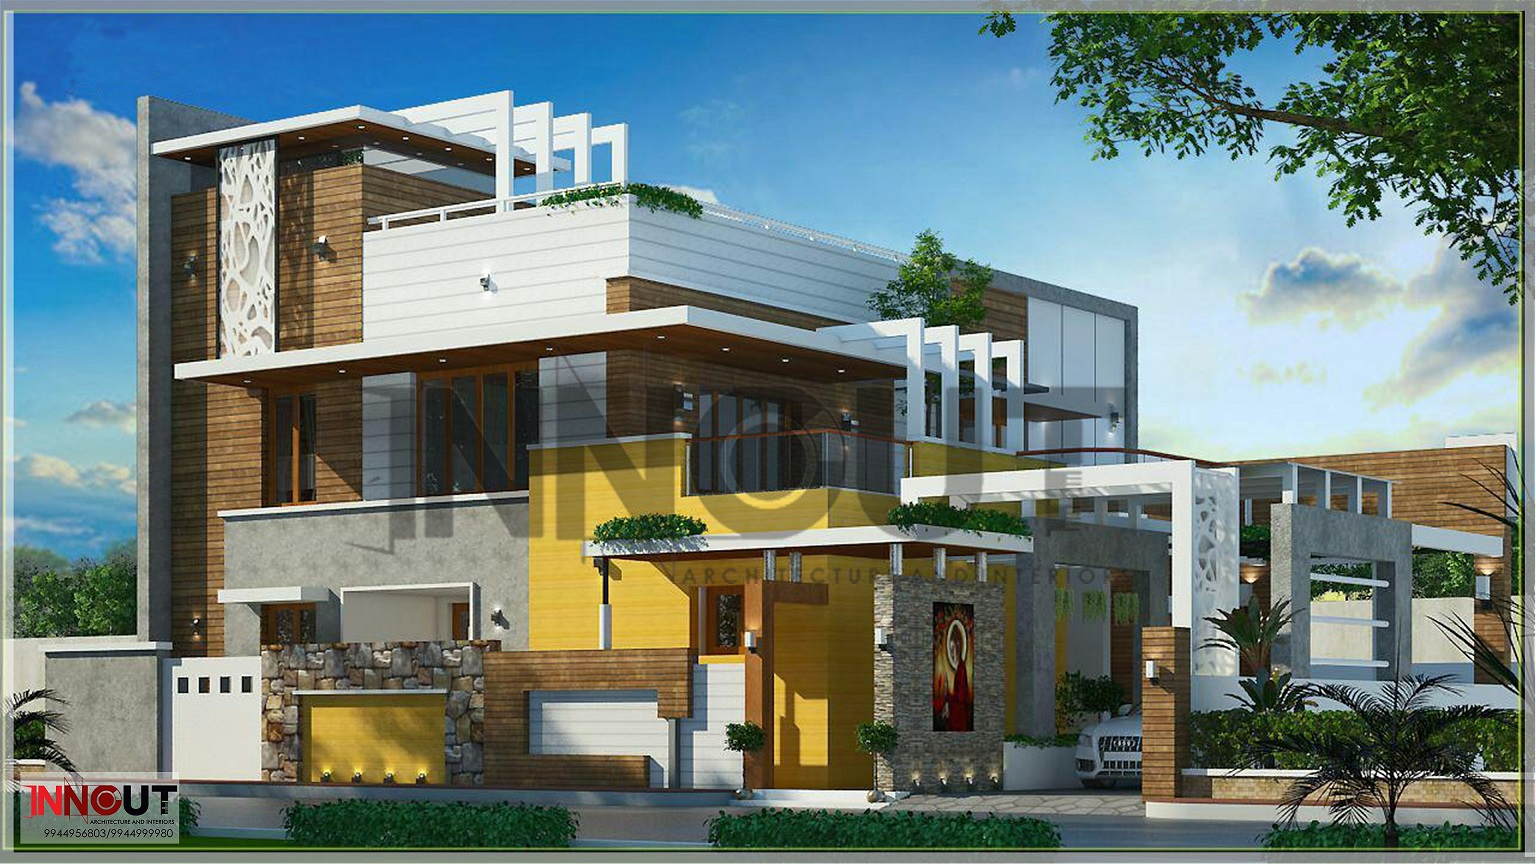 Mr.Maniyan Residence 3750 sq.ft with 3 beded home @ Tiruppur